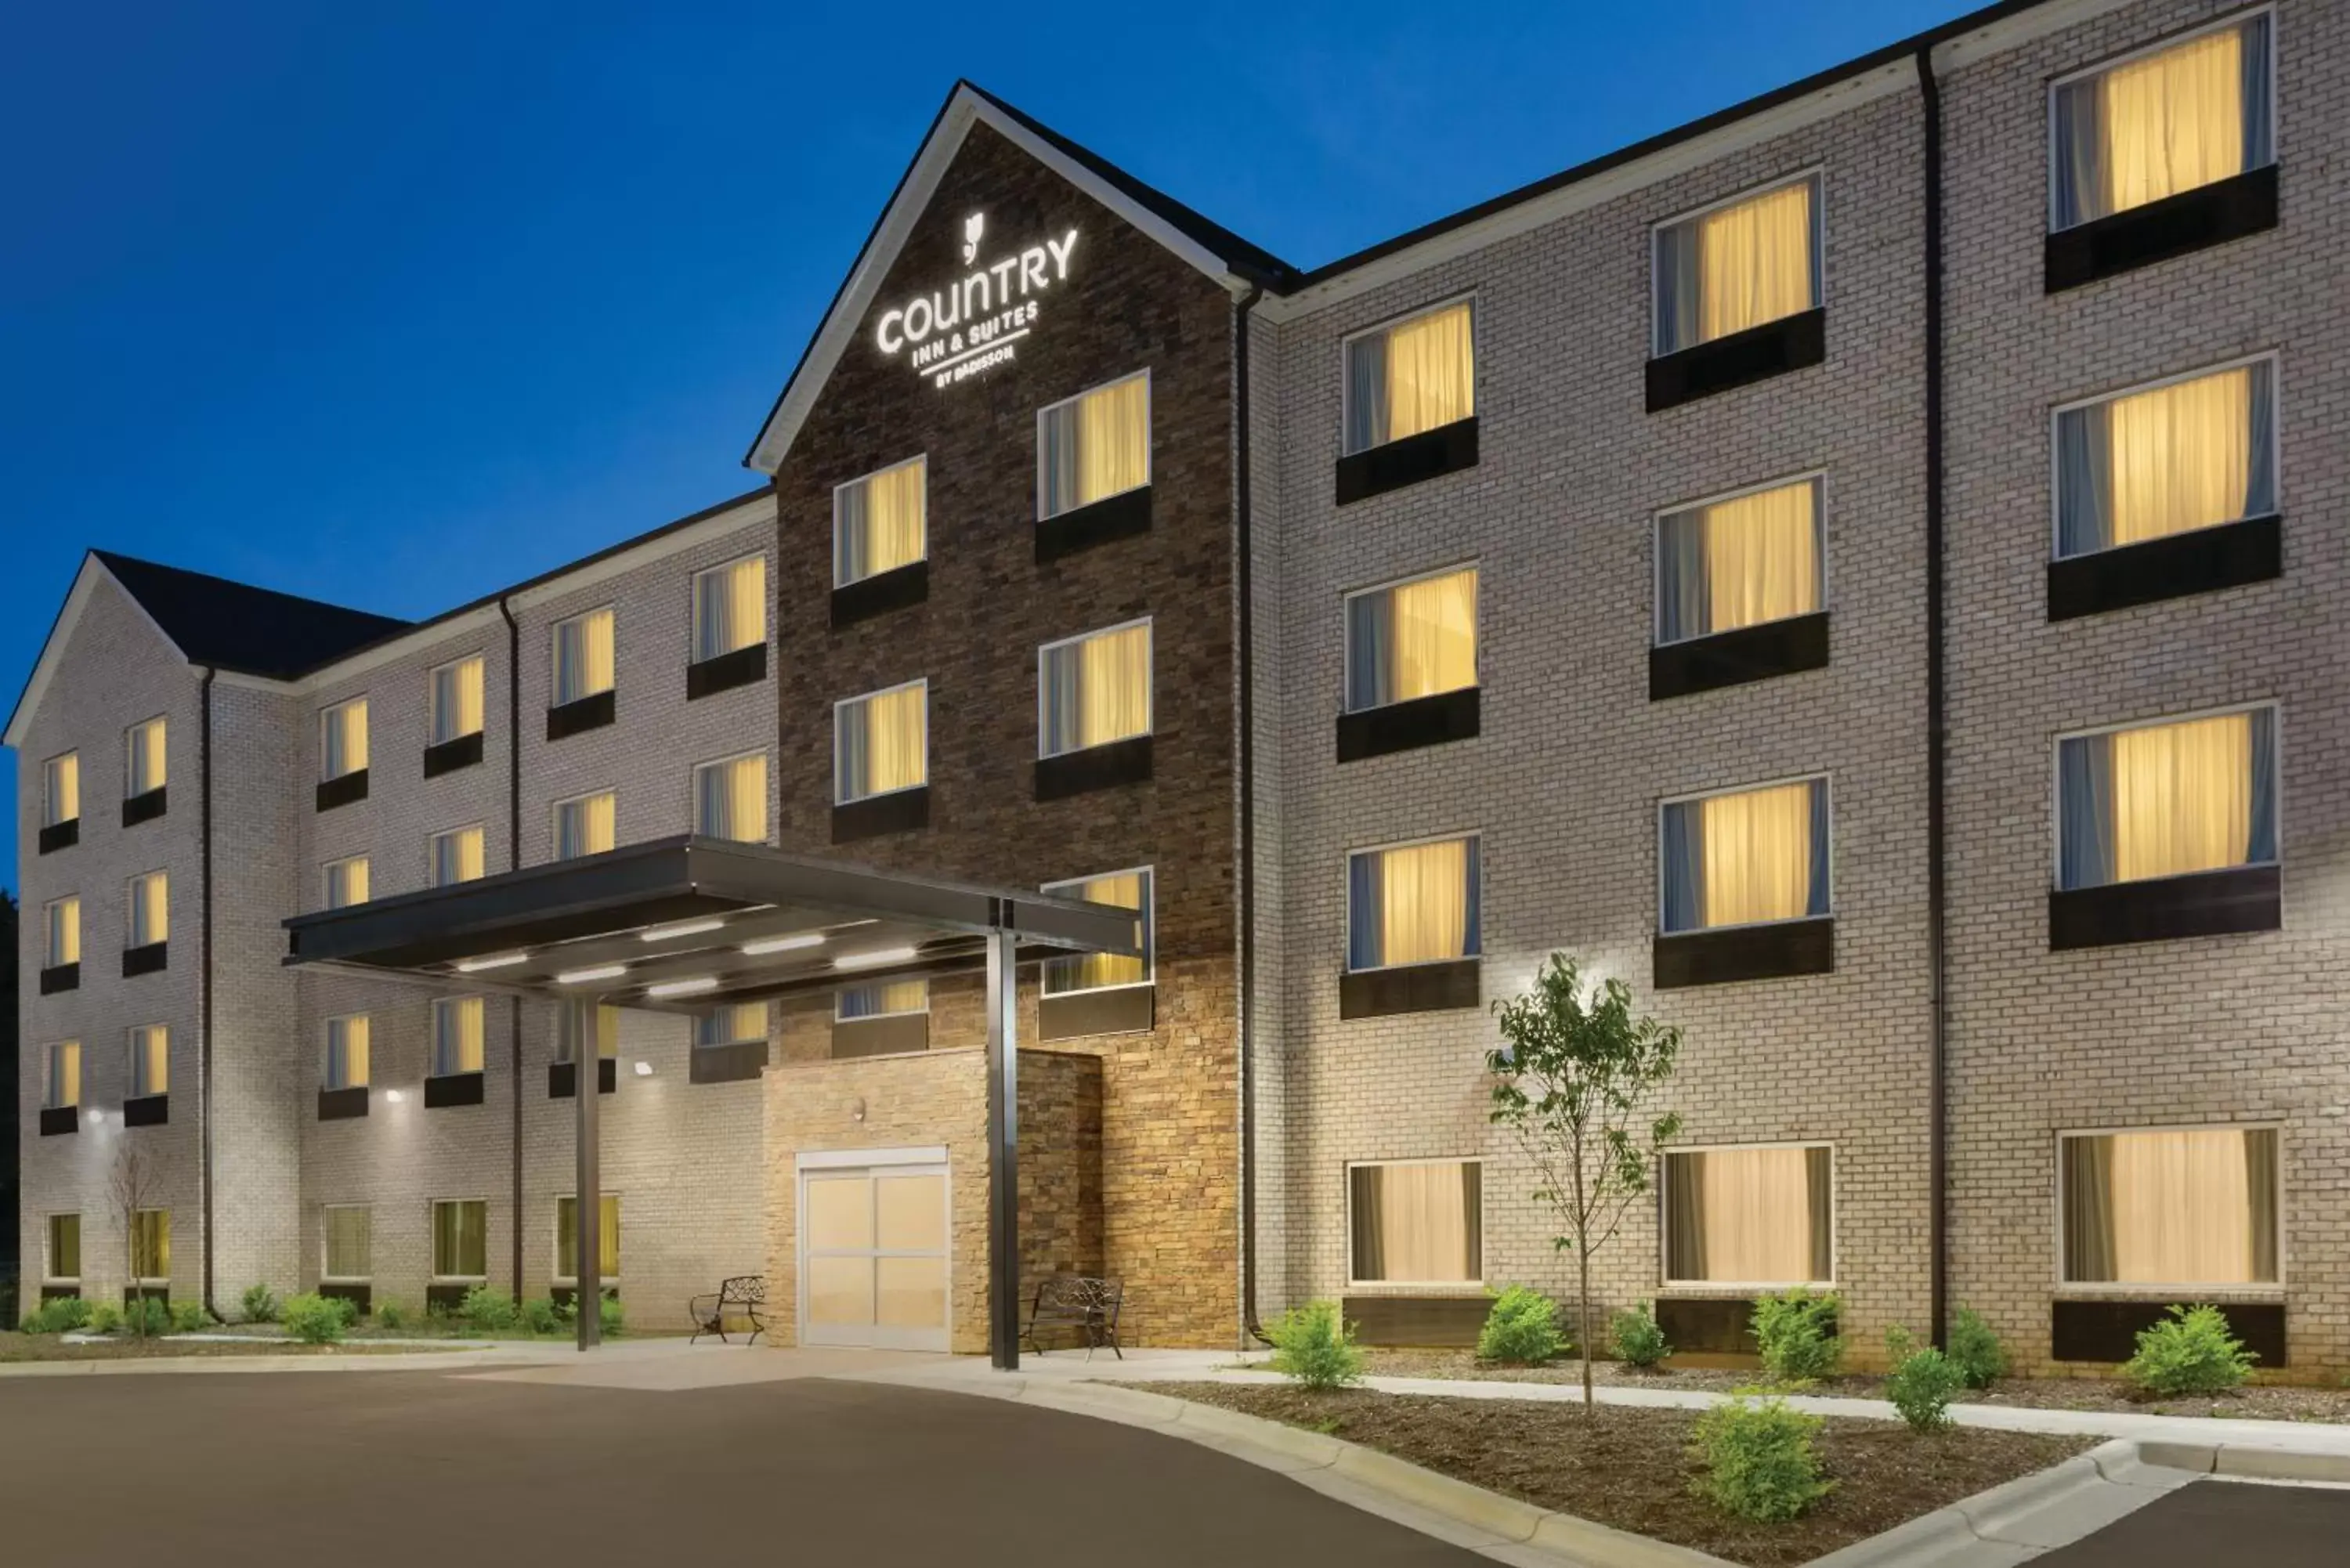 Property Building in Country Inn & Suites by Radisson, Greensboro, NC